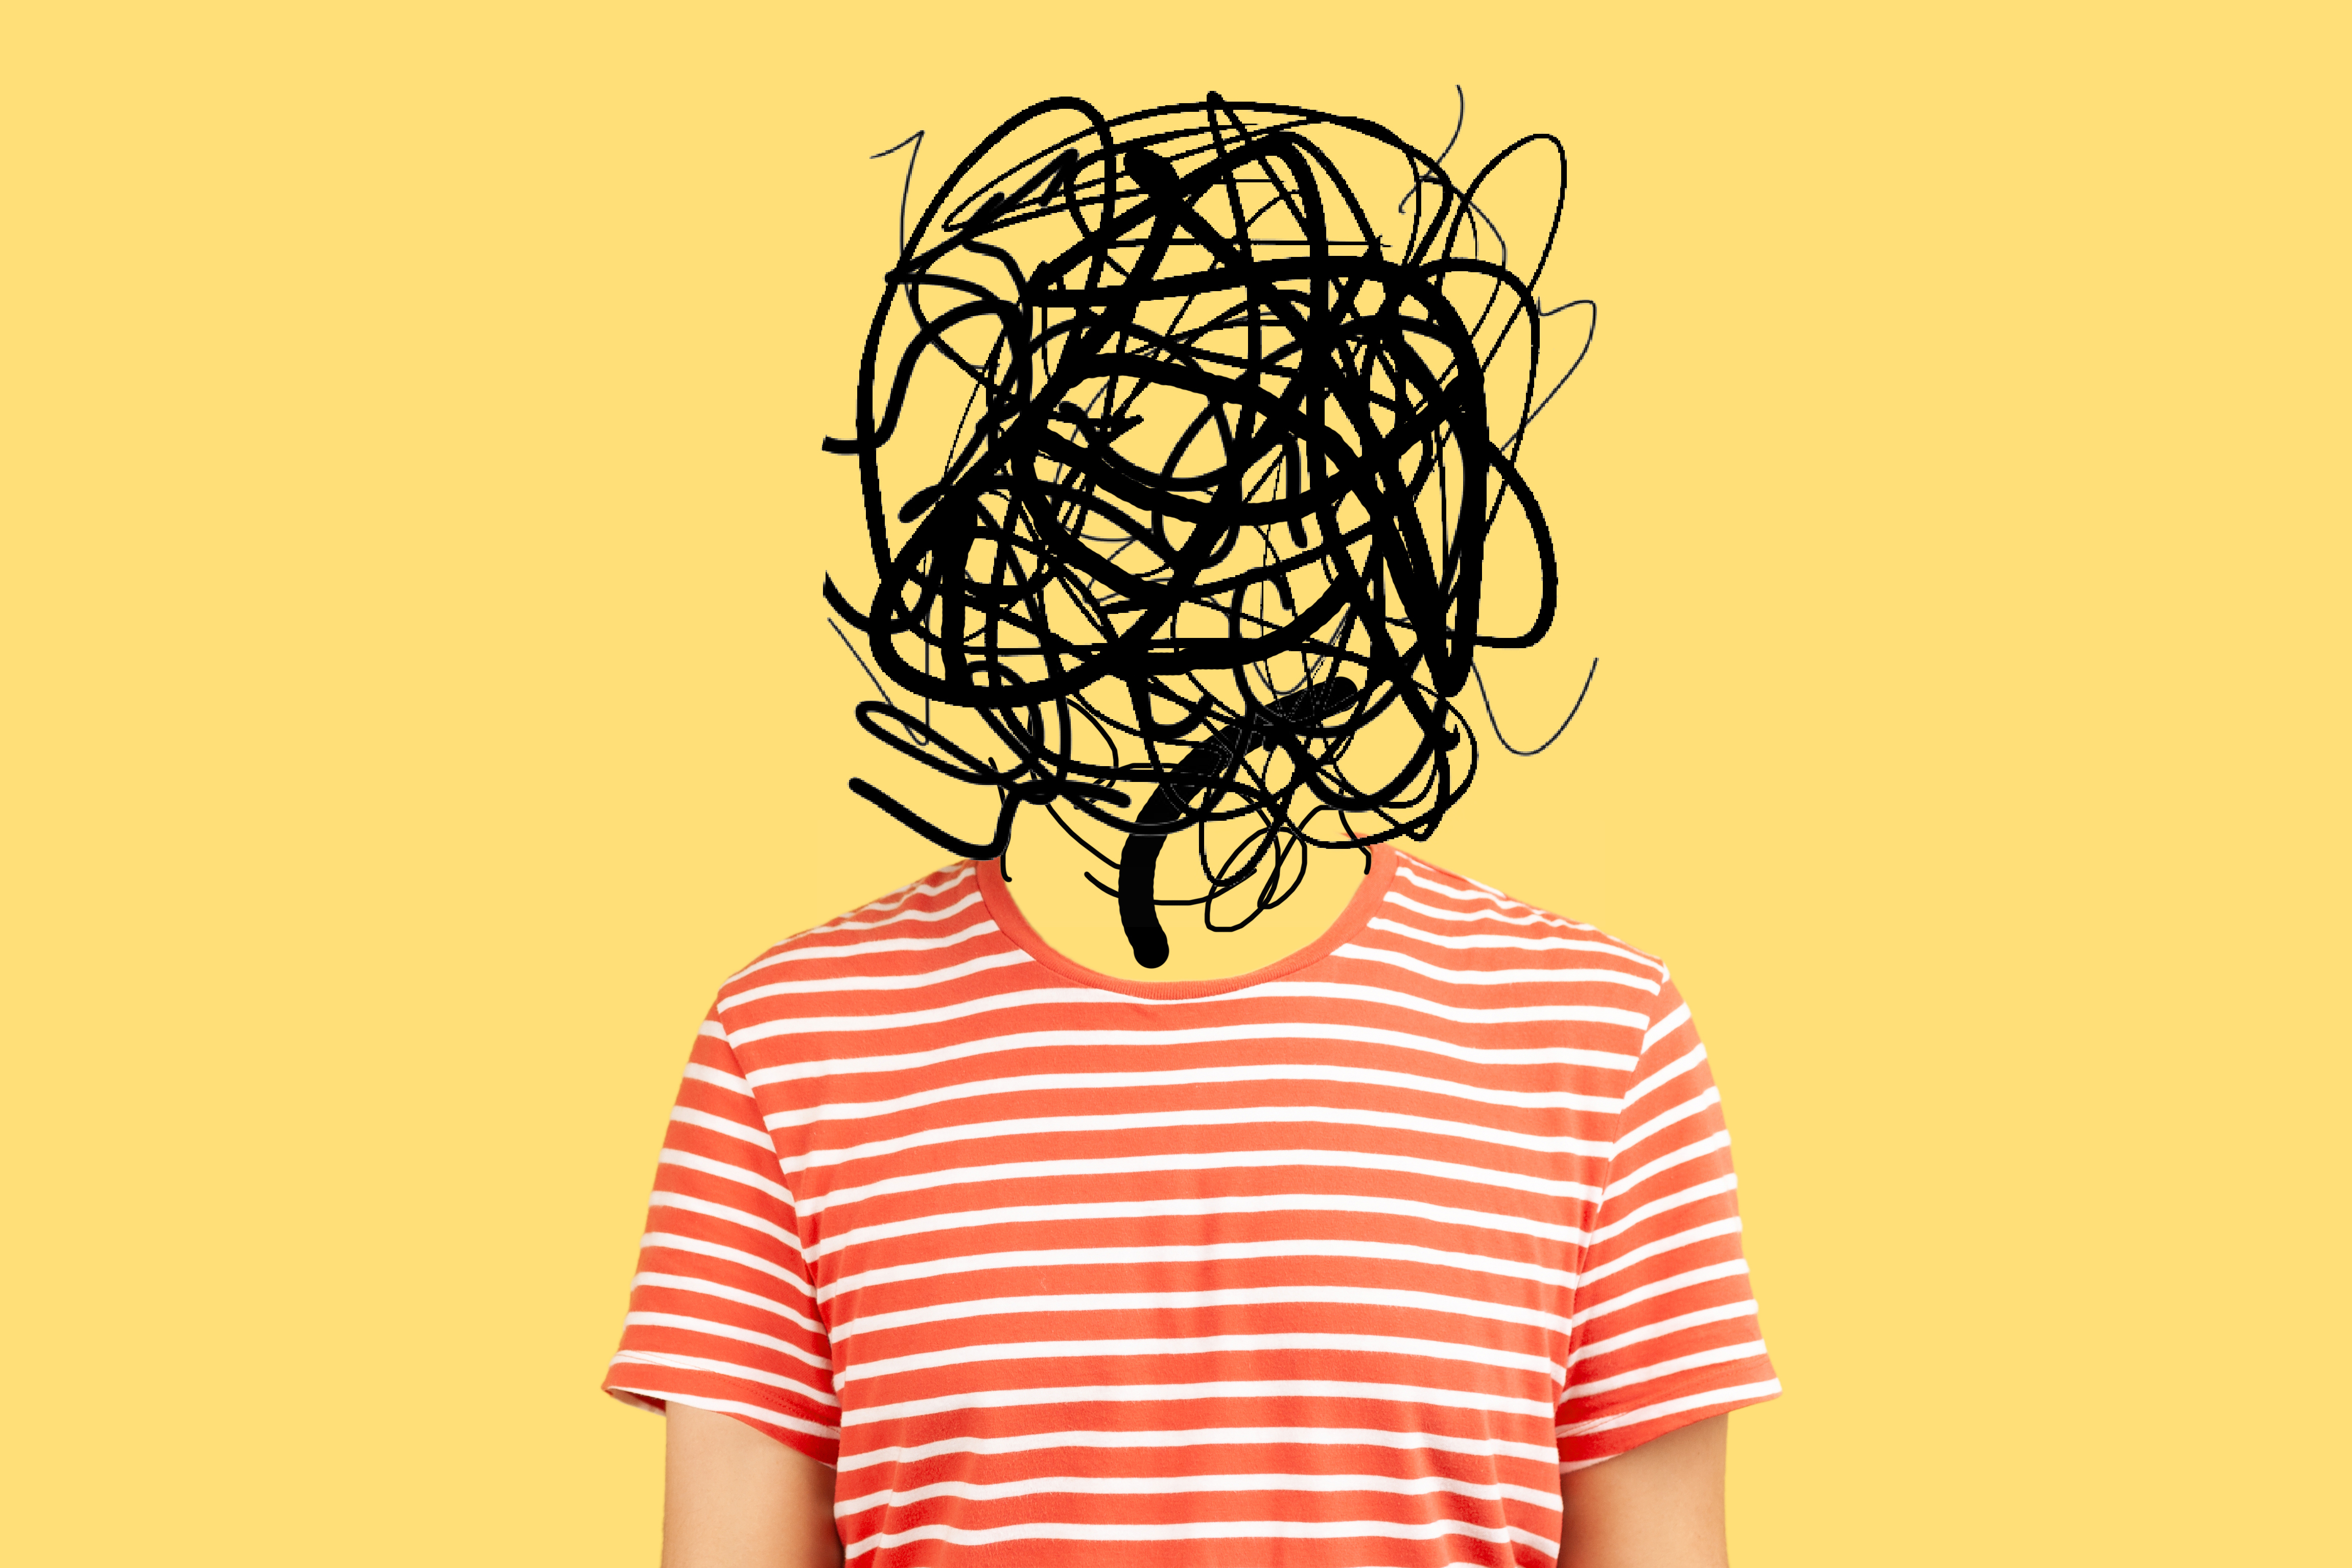 Illustration of a man with a tangled scribble over his head